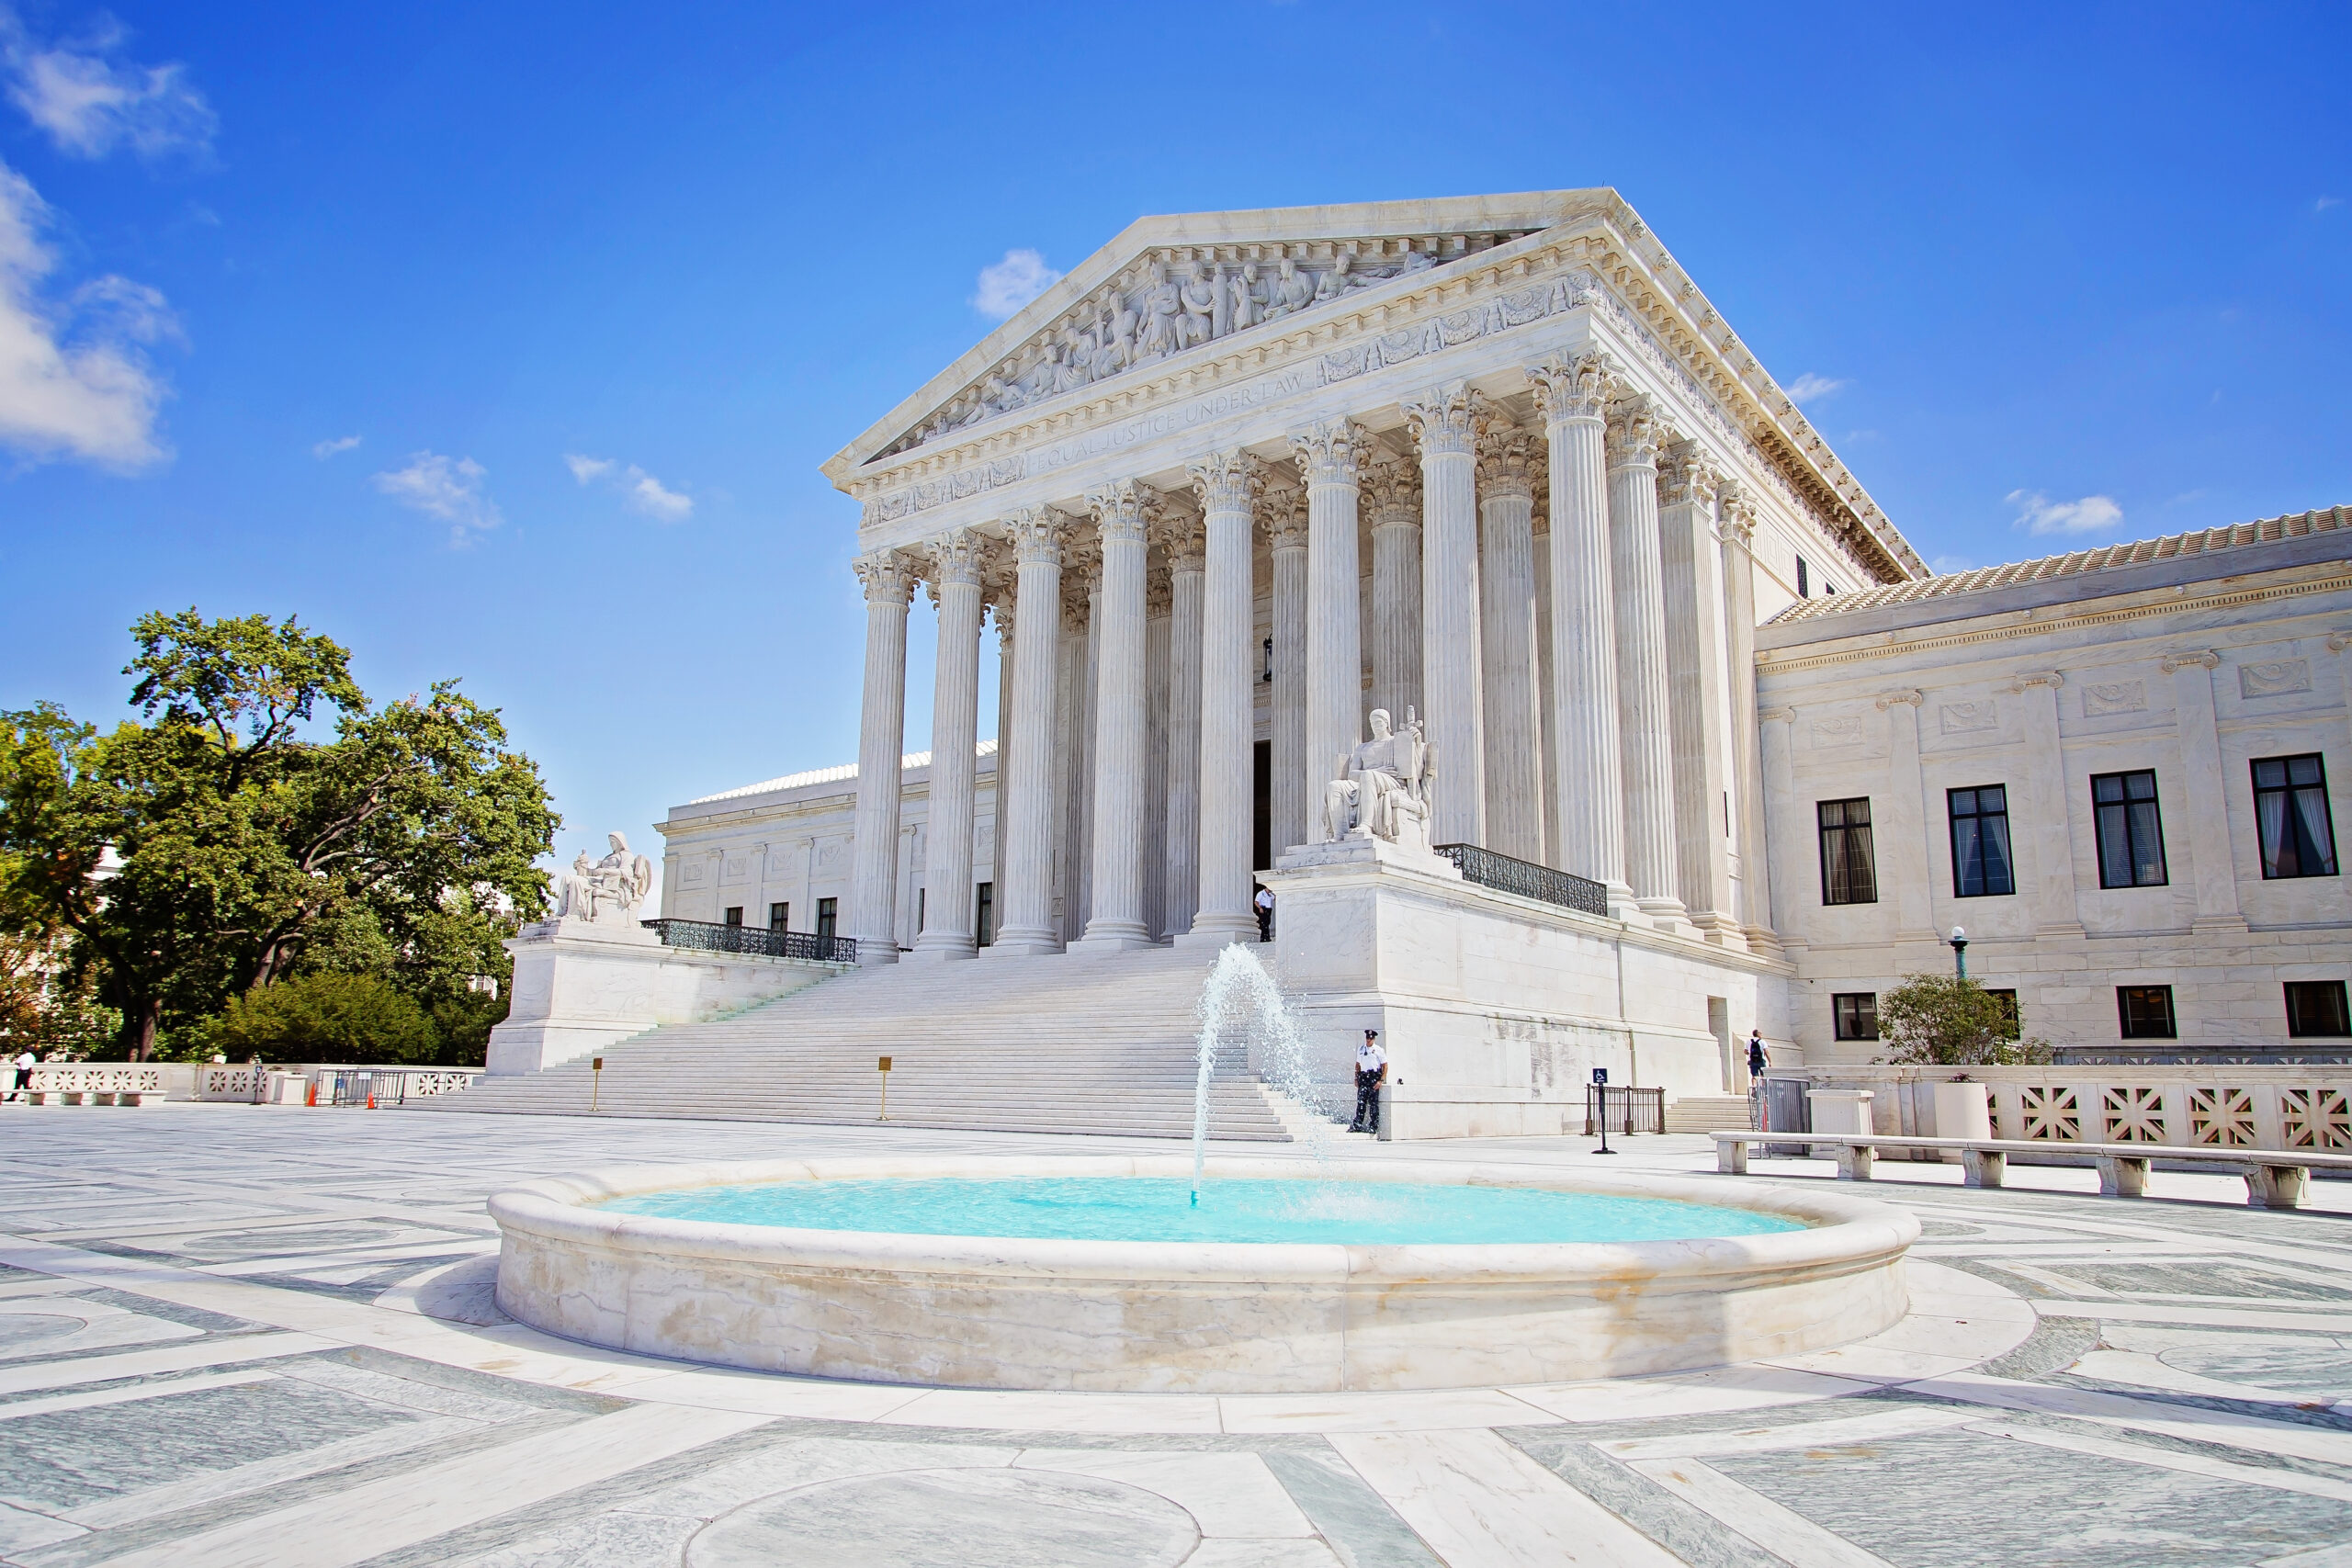 Affirmation Action was ruled out at United states Supreme Court Building